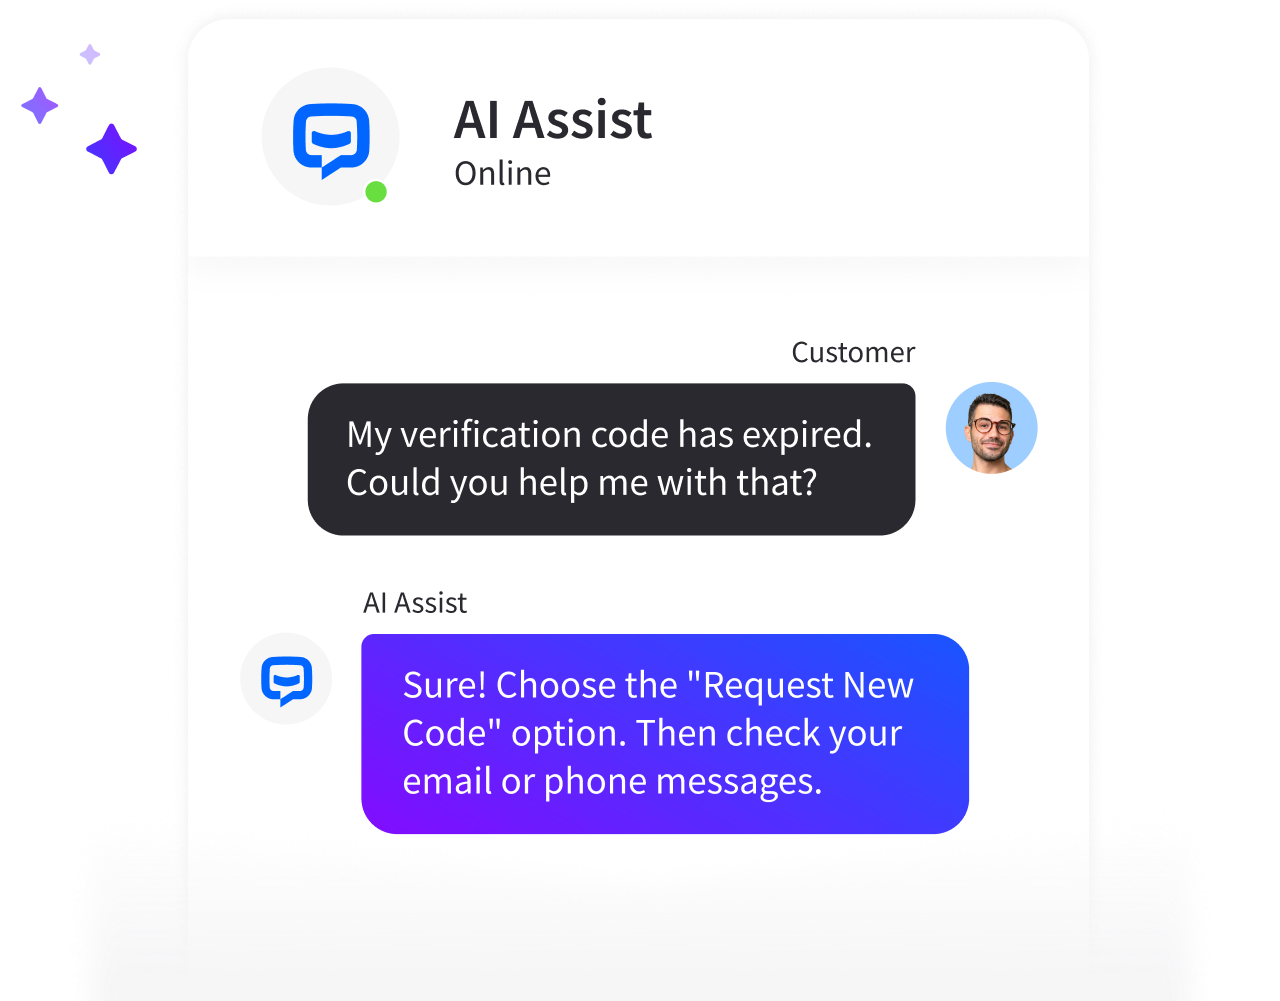 An AI-powered chat interface showing a conversation between a customer and ChatBot AI Assist. The customer asks, 'My verification code has expired. Could you help me with that?' AI Assist responds, 'Sure! Choose the 'Request New Code' option. Then check your email or phone messages.